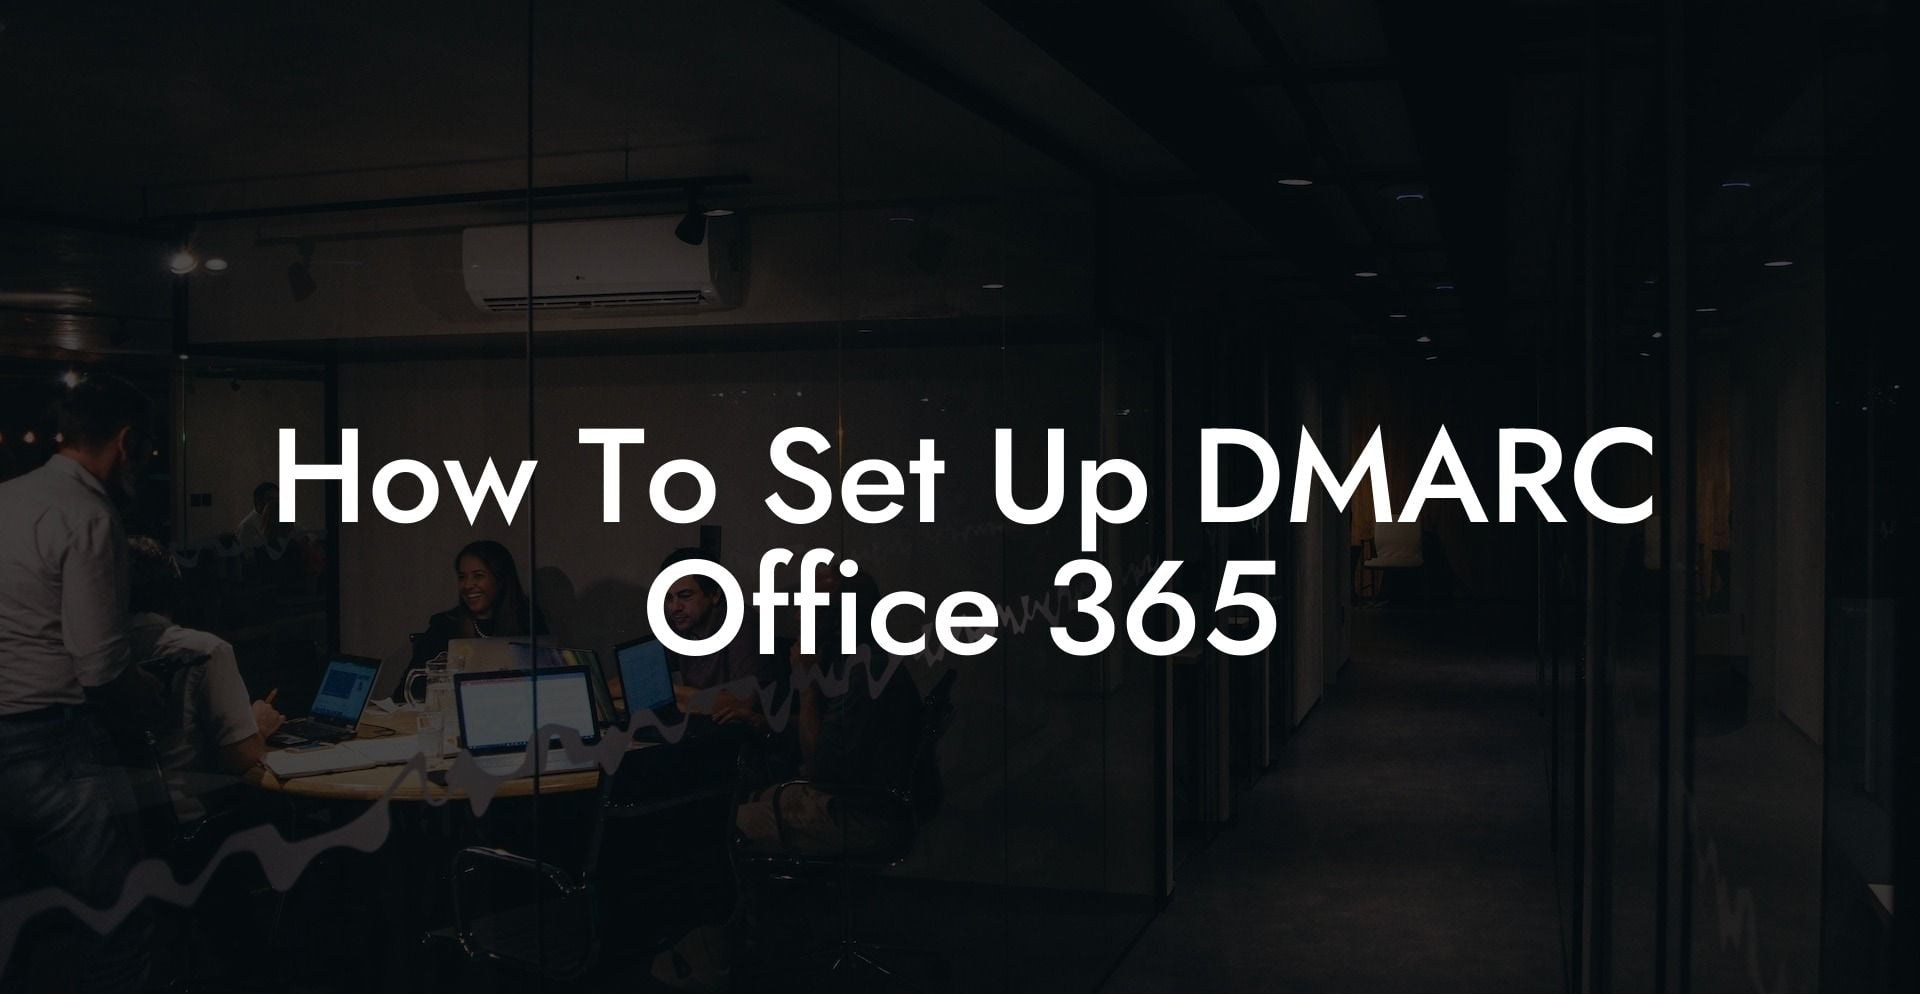 How To Set Up DMARC Office 365